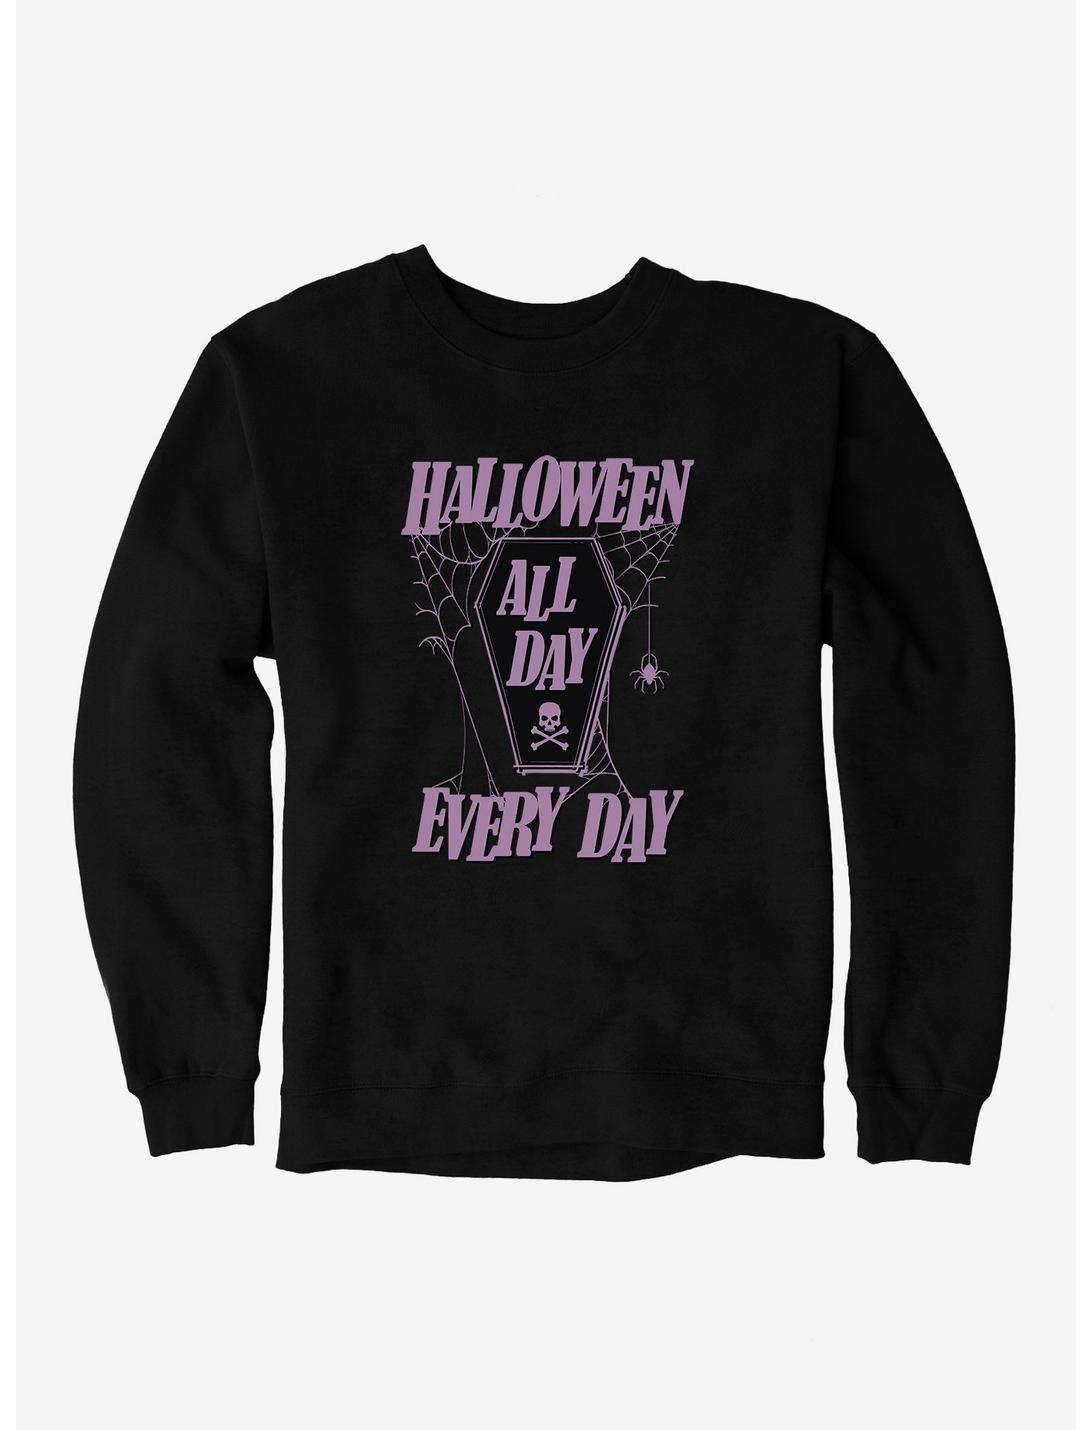 All Day Every Day Sweatshirt, , hi-res